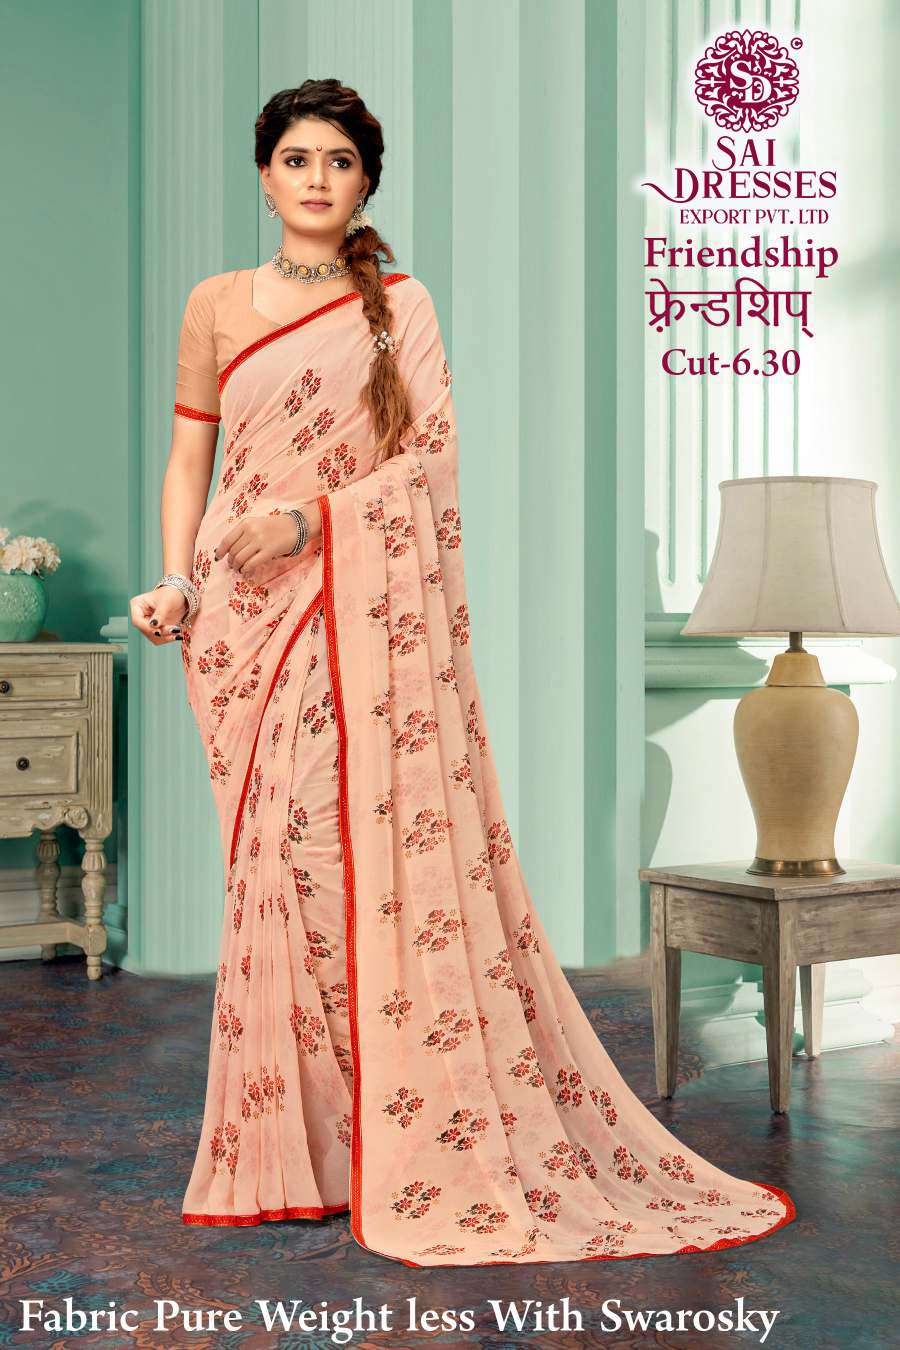 SAI DRESSES PRESENT FRIENDSHIP DAILY WEAR PURE WEIGHT LESS FABRIC WITH SWAROSKY WORK SAREE IN WHOLESALE RATE IN SURAT